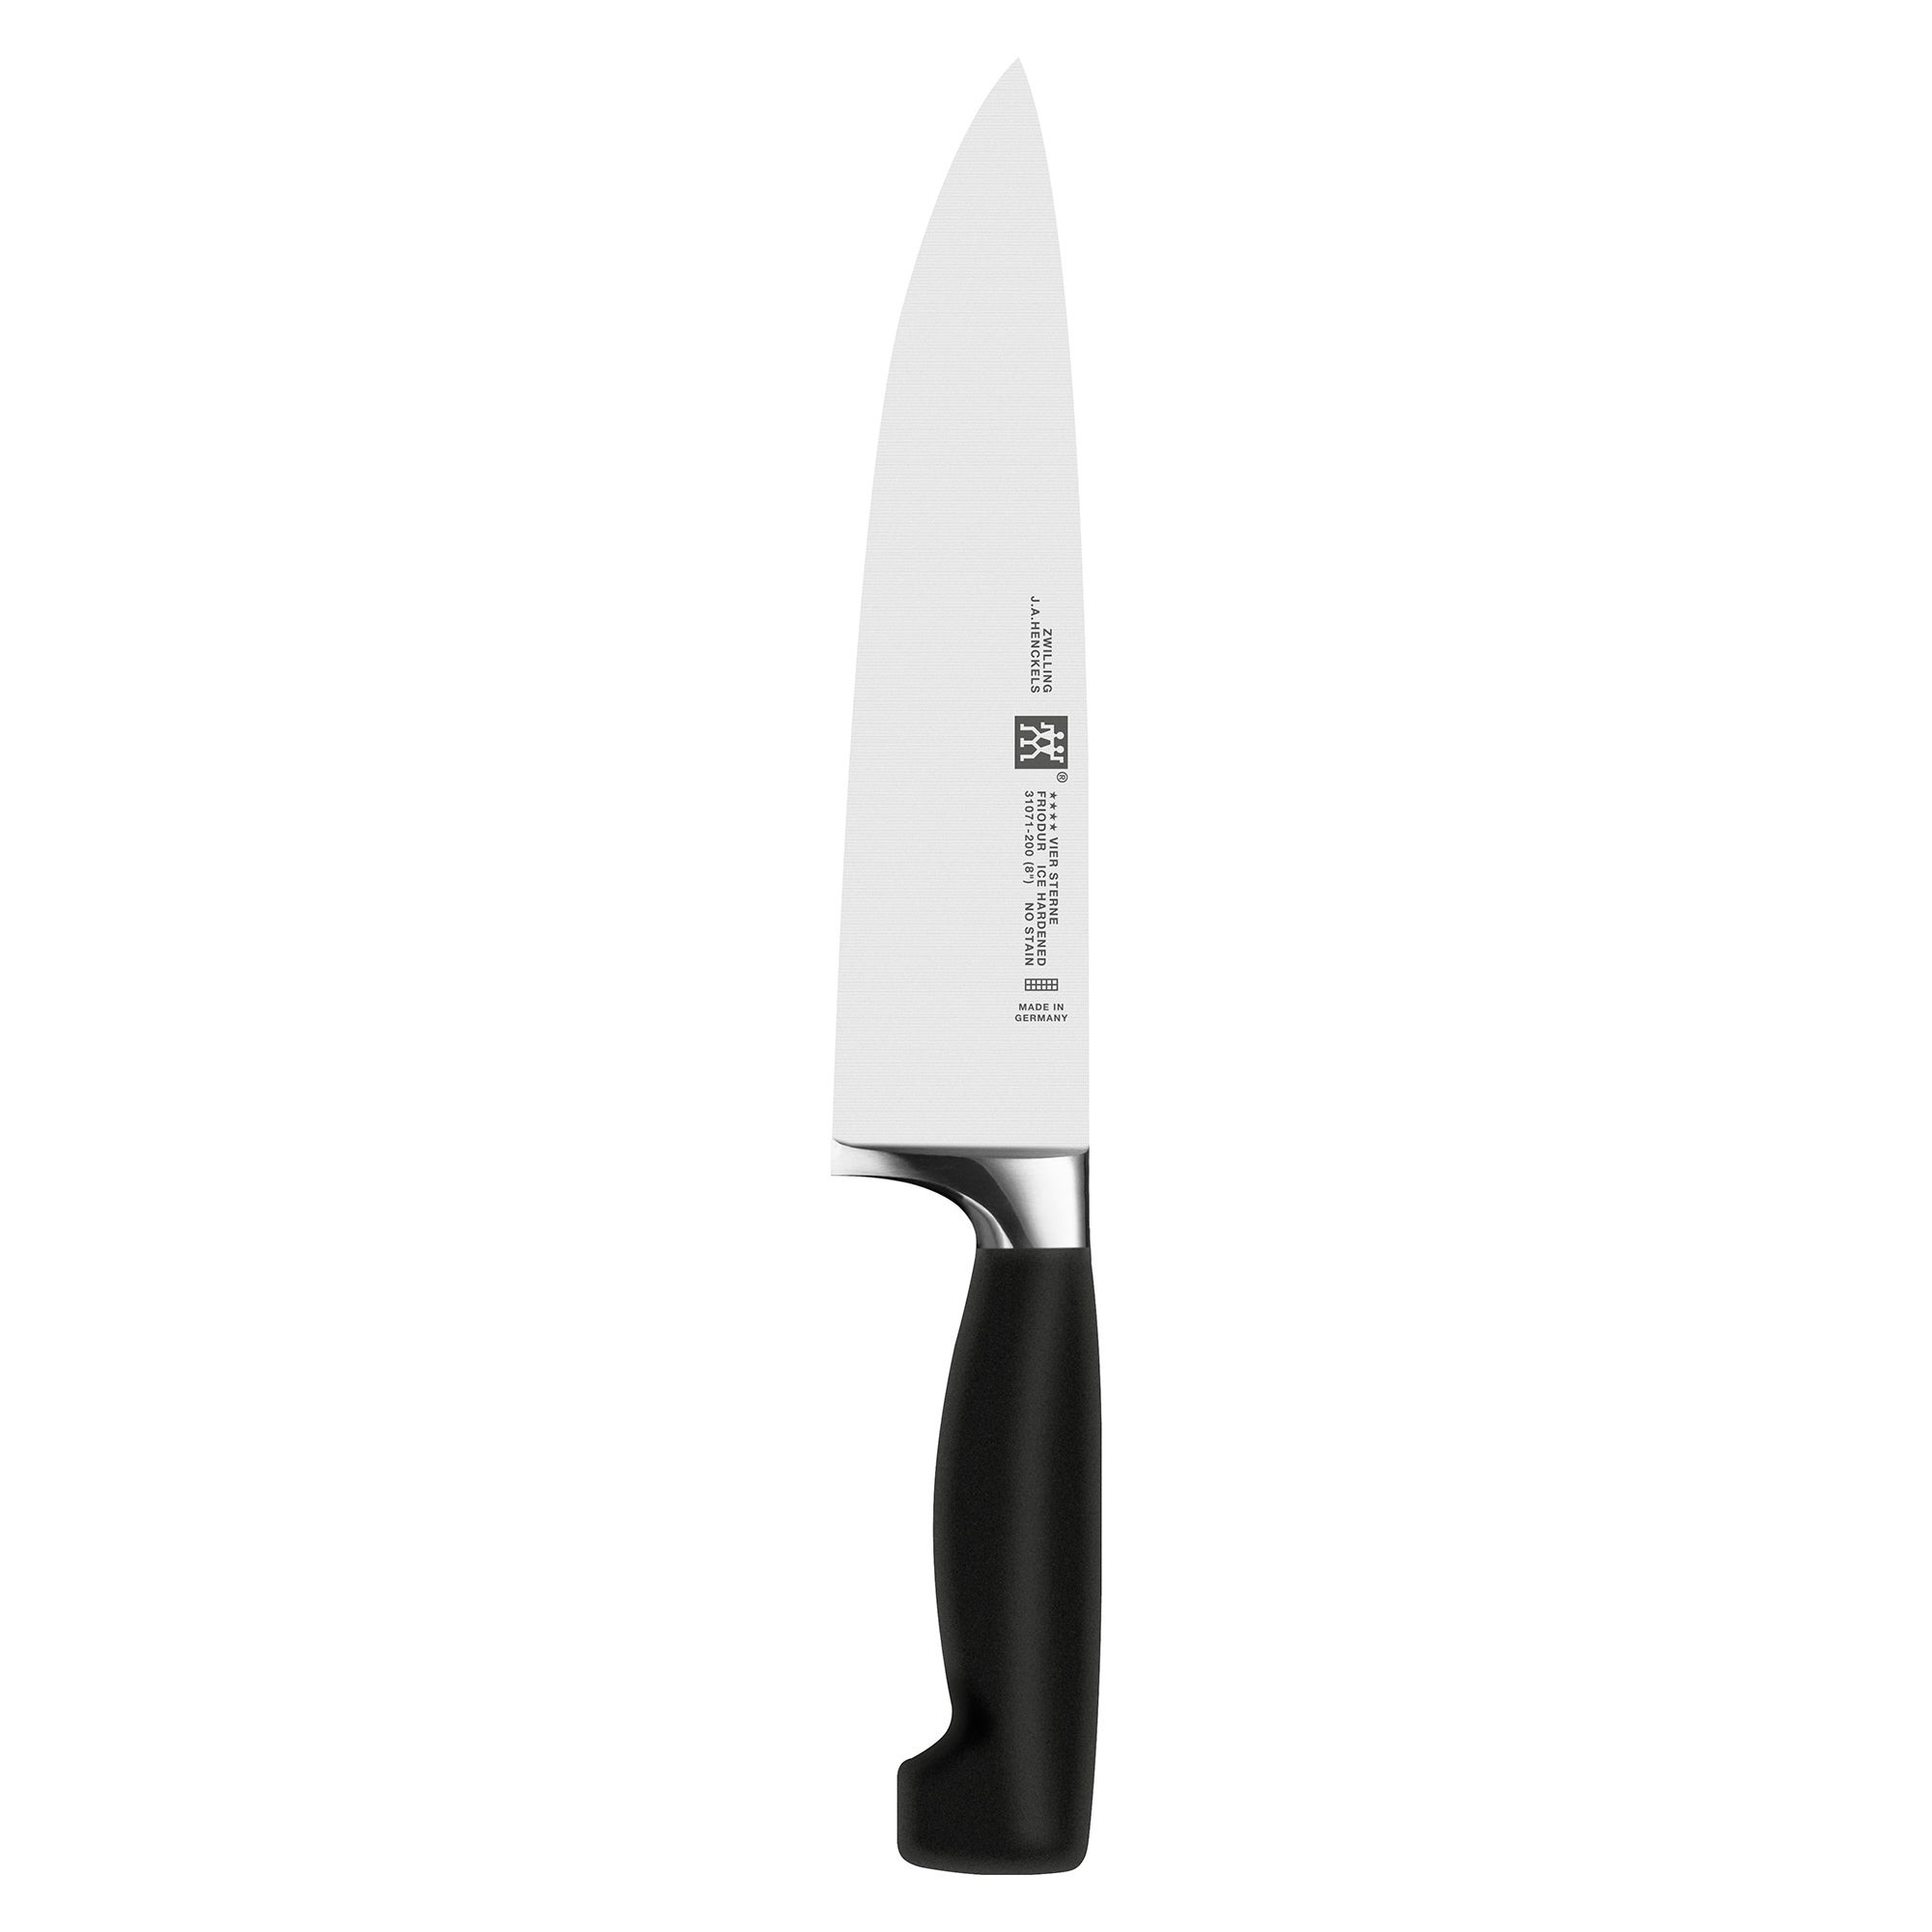 8" Four Star Chef's Knife